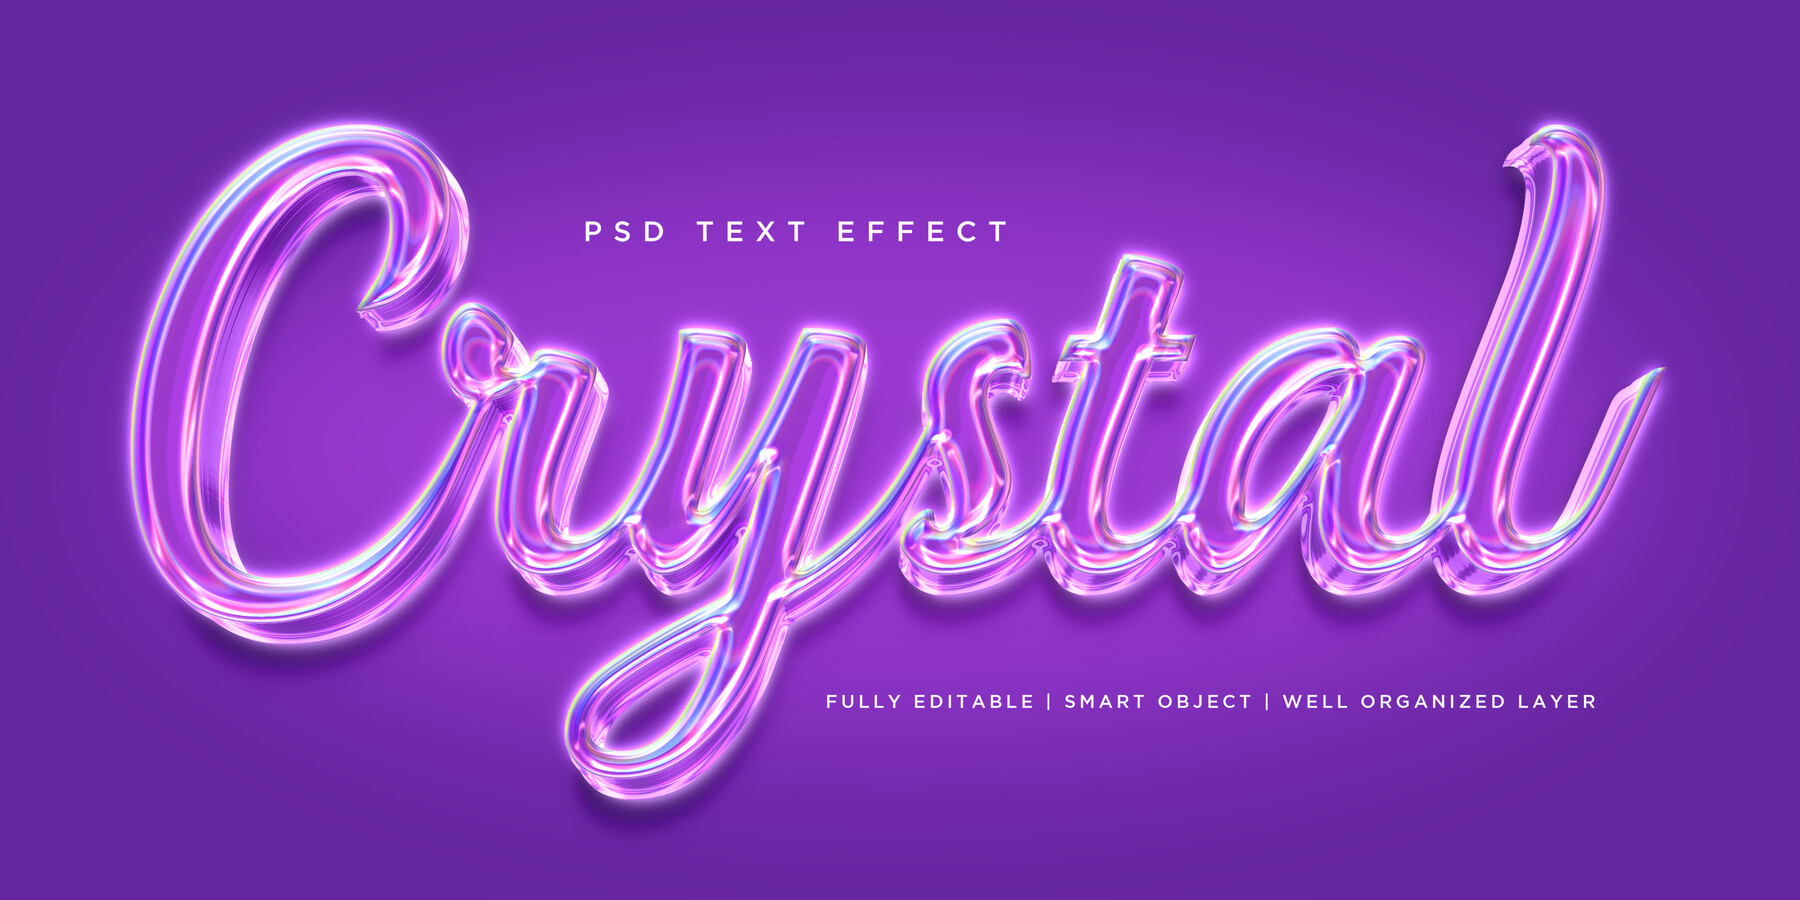 ArtStation - Bevel PSD fully editable text effect. Layer style PSD mockup  template.